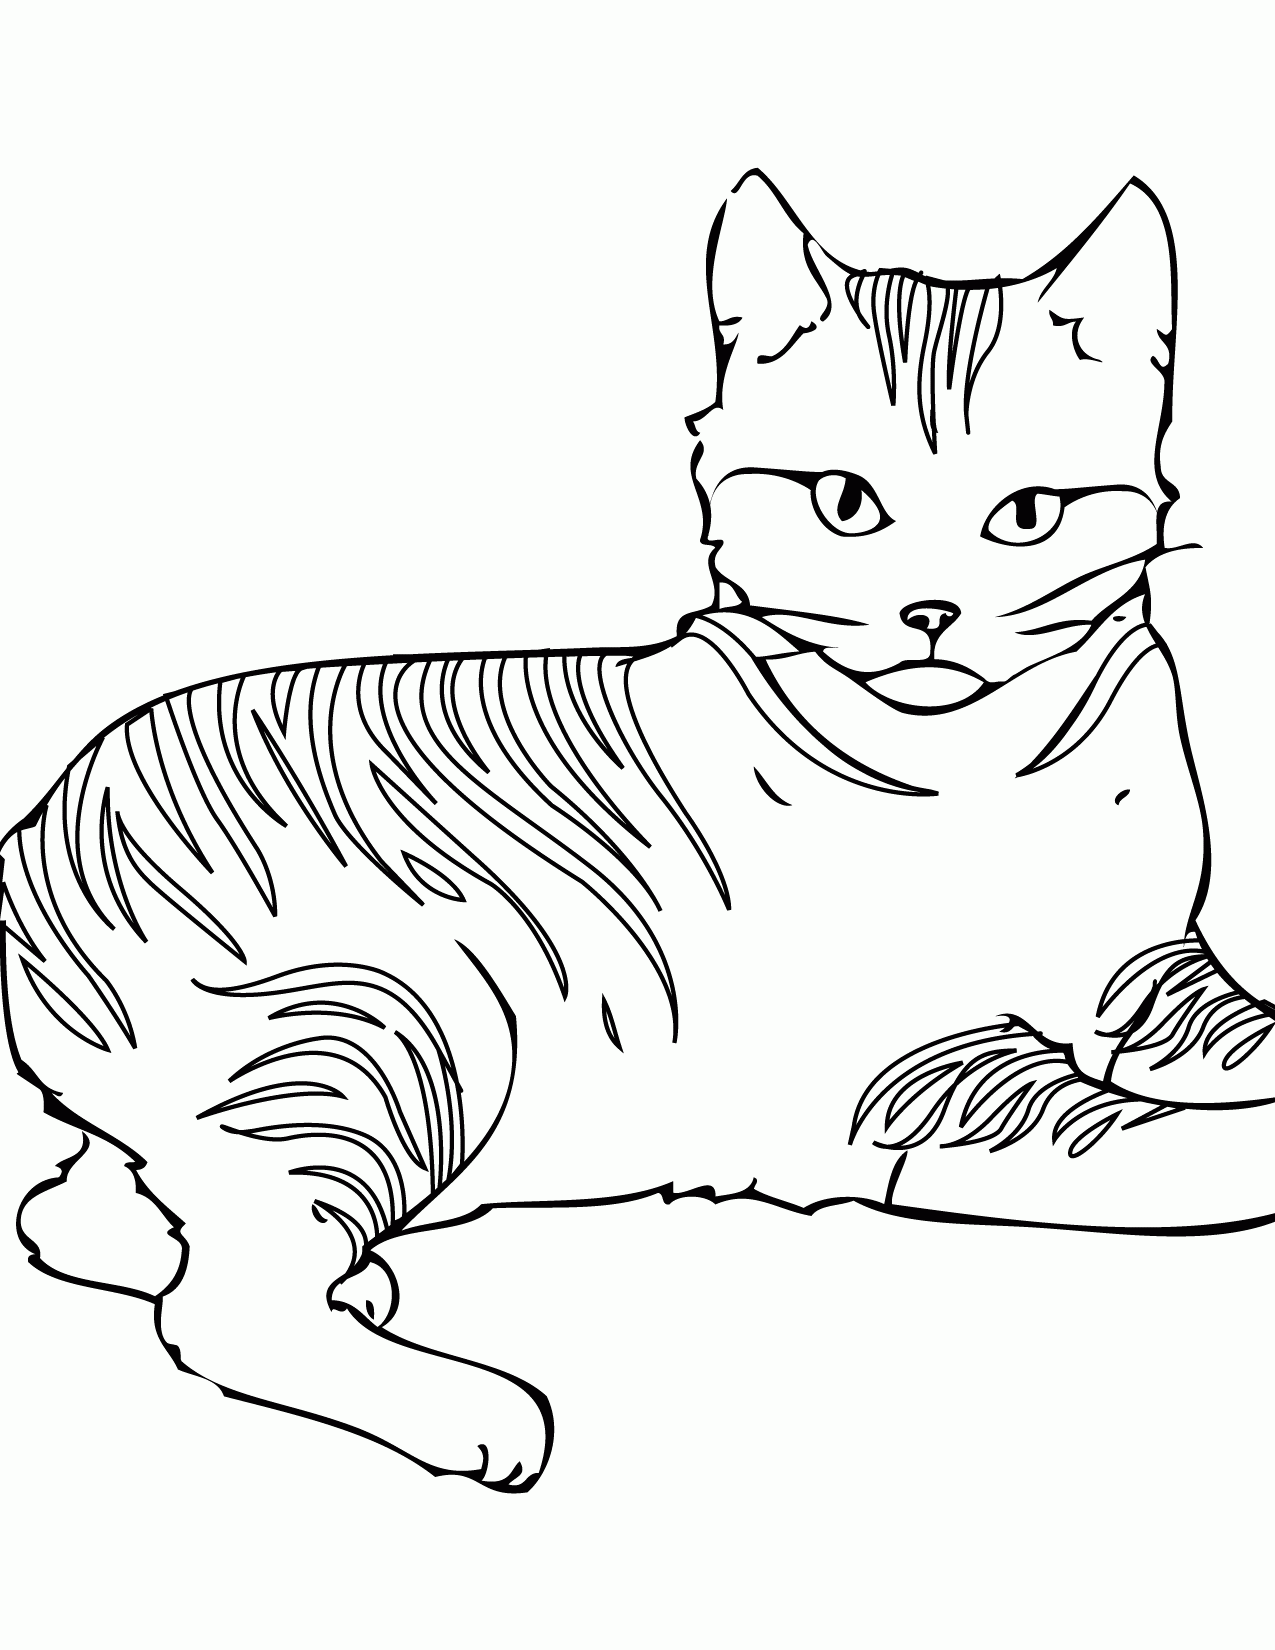 Warrior Cats Coloring Page - Coloring Home